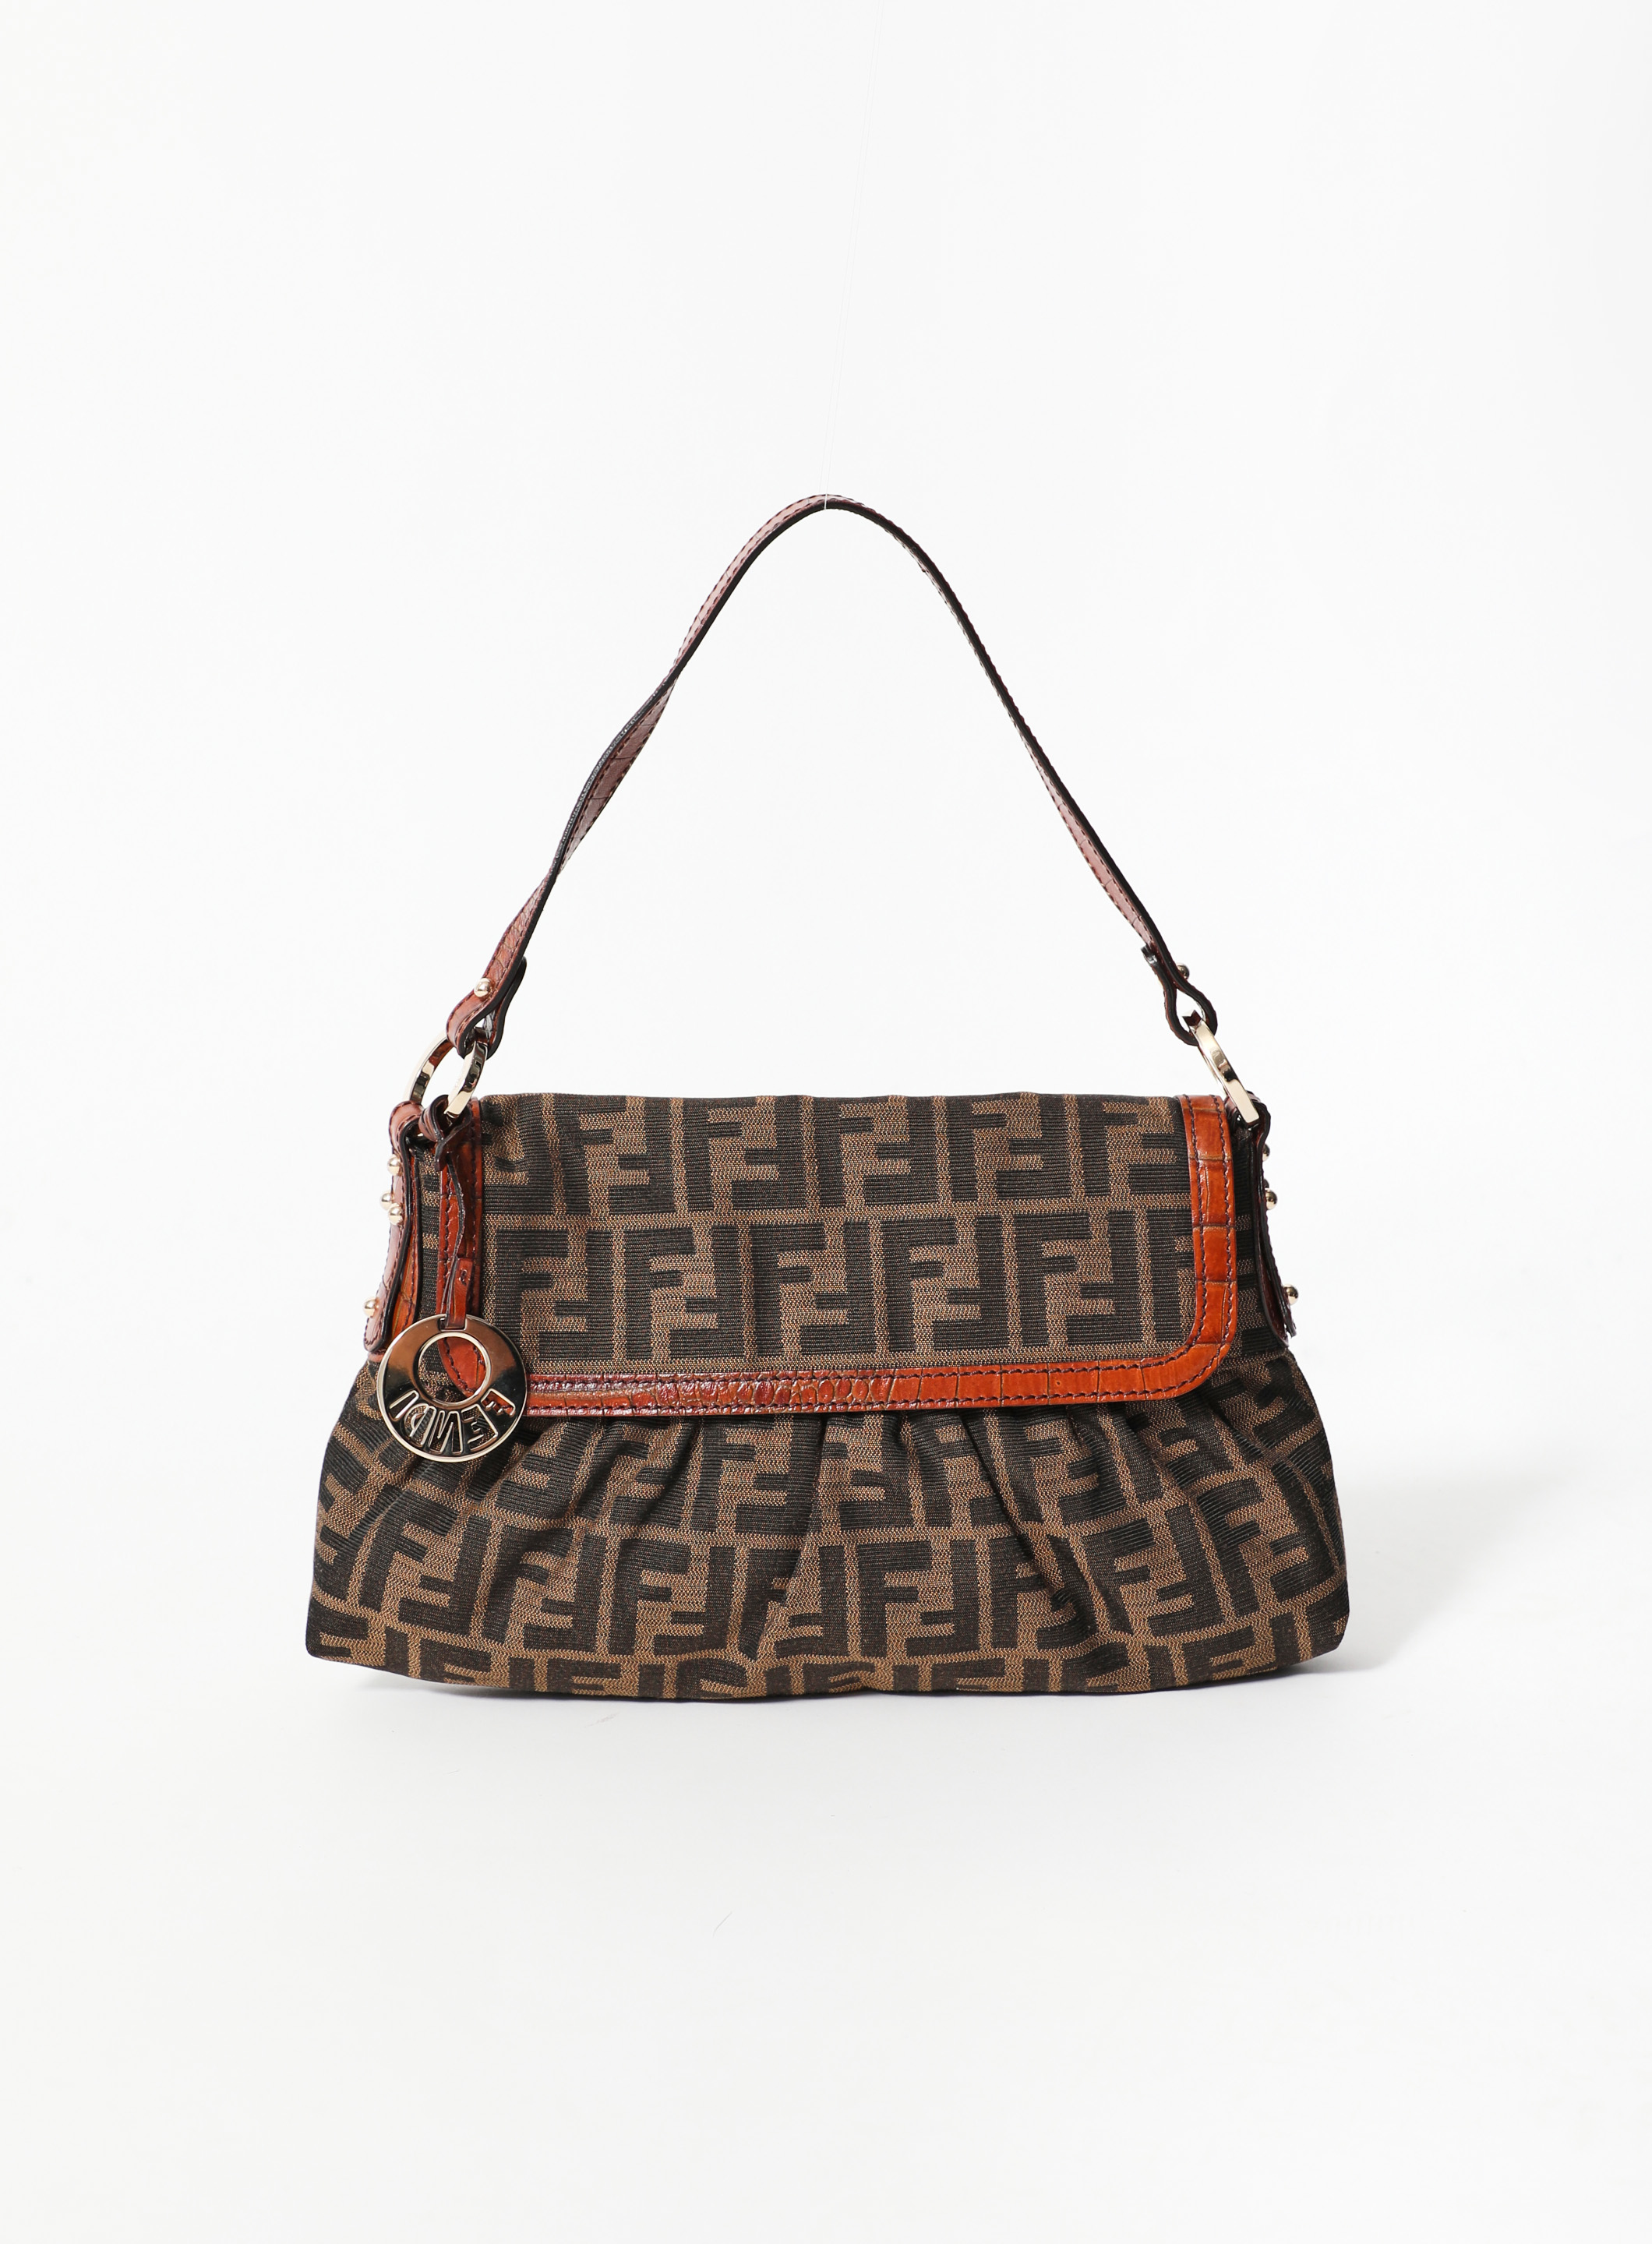 3 Tips to Authenticating Vintage Fendi Bags